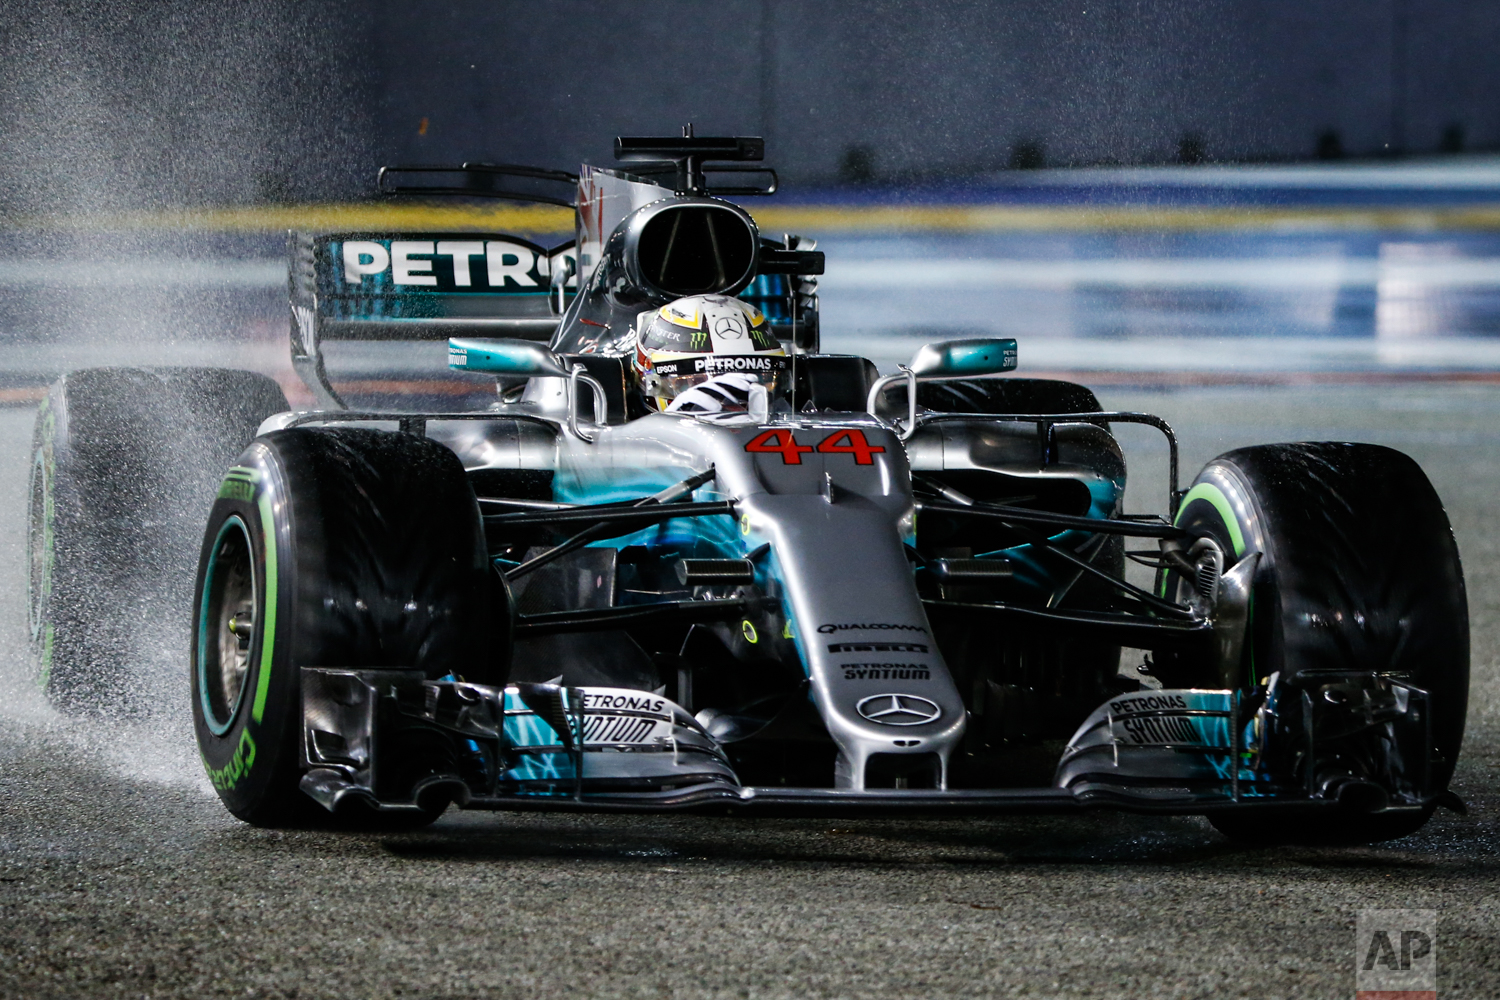  Mercedes driver Lewis Hamilton of Britain steers his car during the Singapore Formula One Grand Prix on the Marina Bay City Circuit Singapore, Sunday, Sept. 17, 2017. (AP Photo/Yong Teck Lim) 